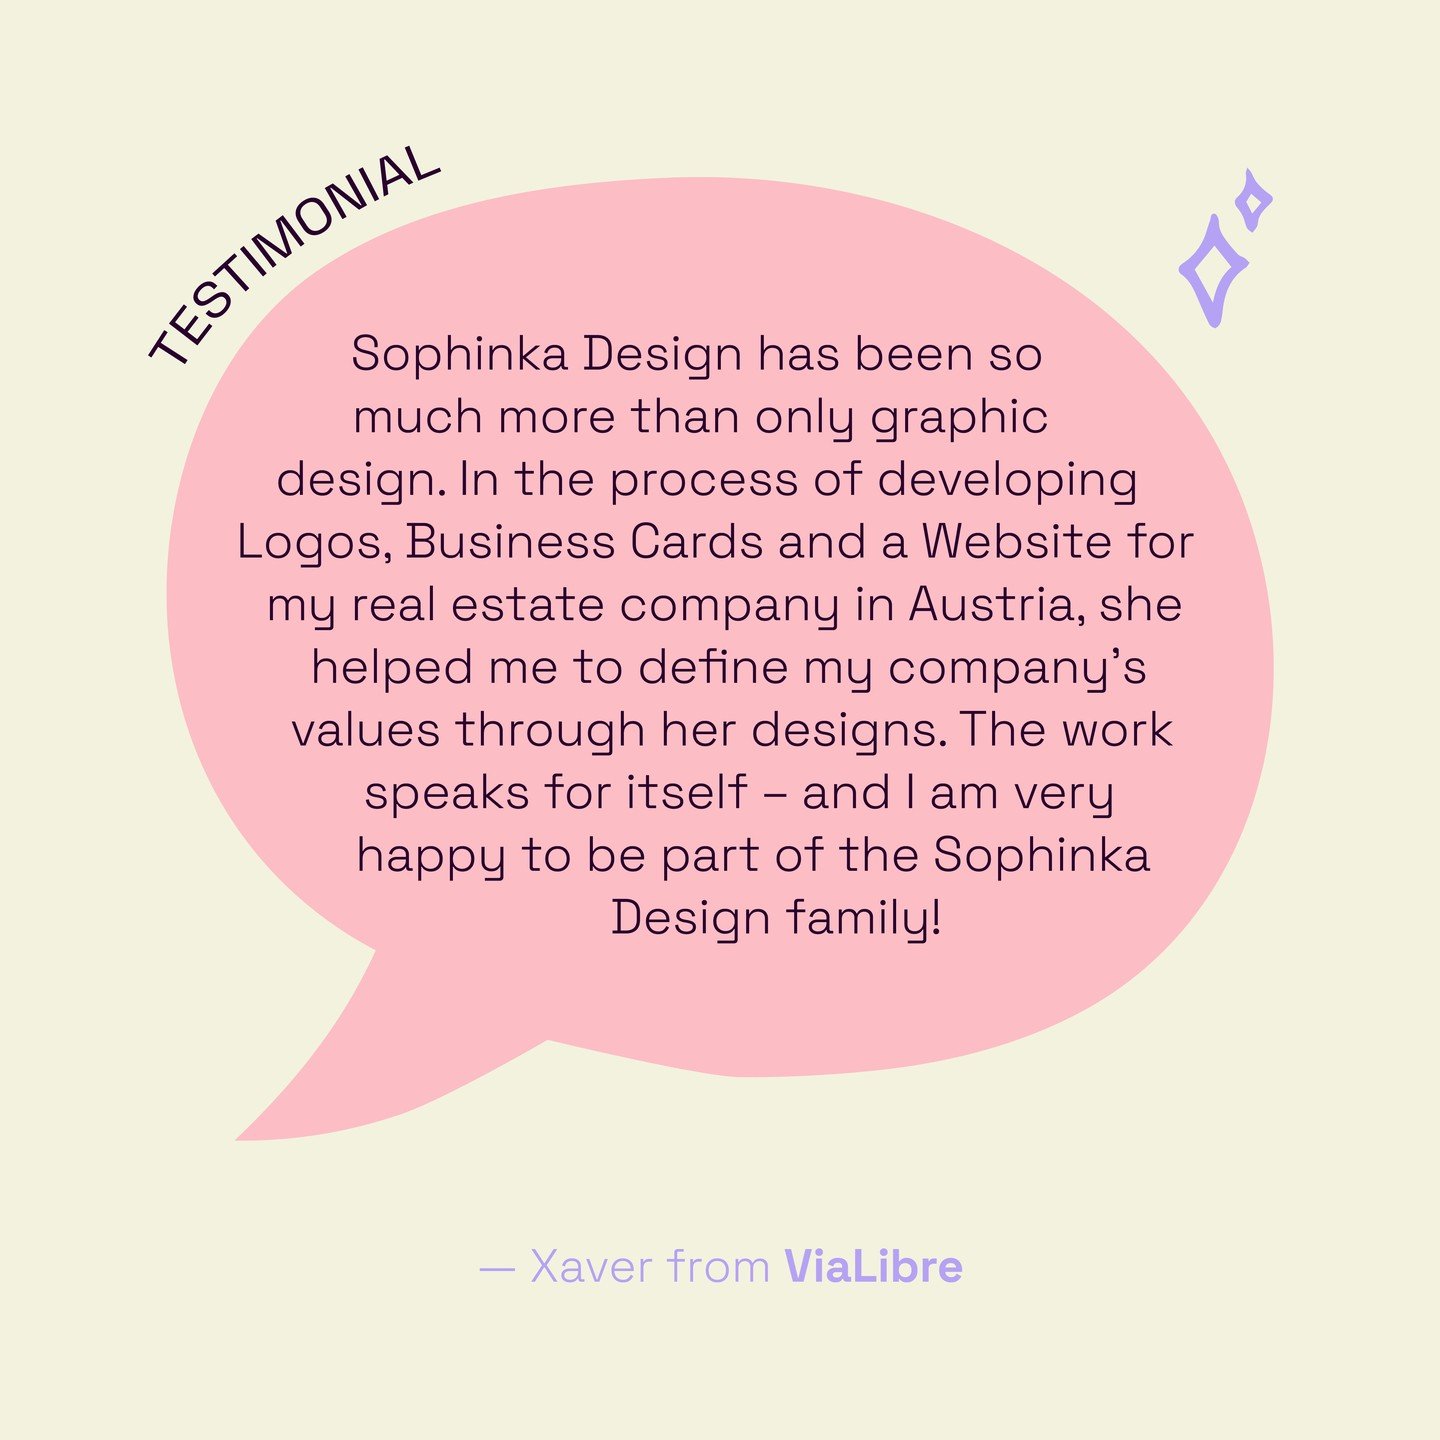 a lovely testimonial from my client Xaver of ViaLibre✨ thank you 🥰

this project was completed almost 3 years ago but still love the logo mark I designed so much 🫶

ViaLibre is a real estate company based in Vienna, Austria. I designed the logo, st